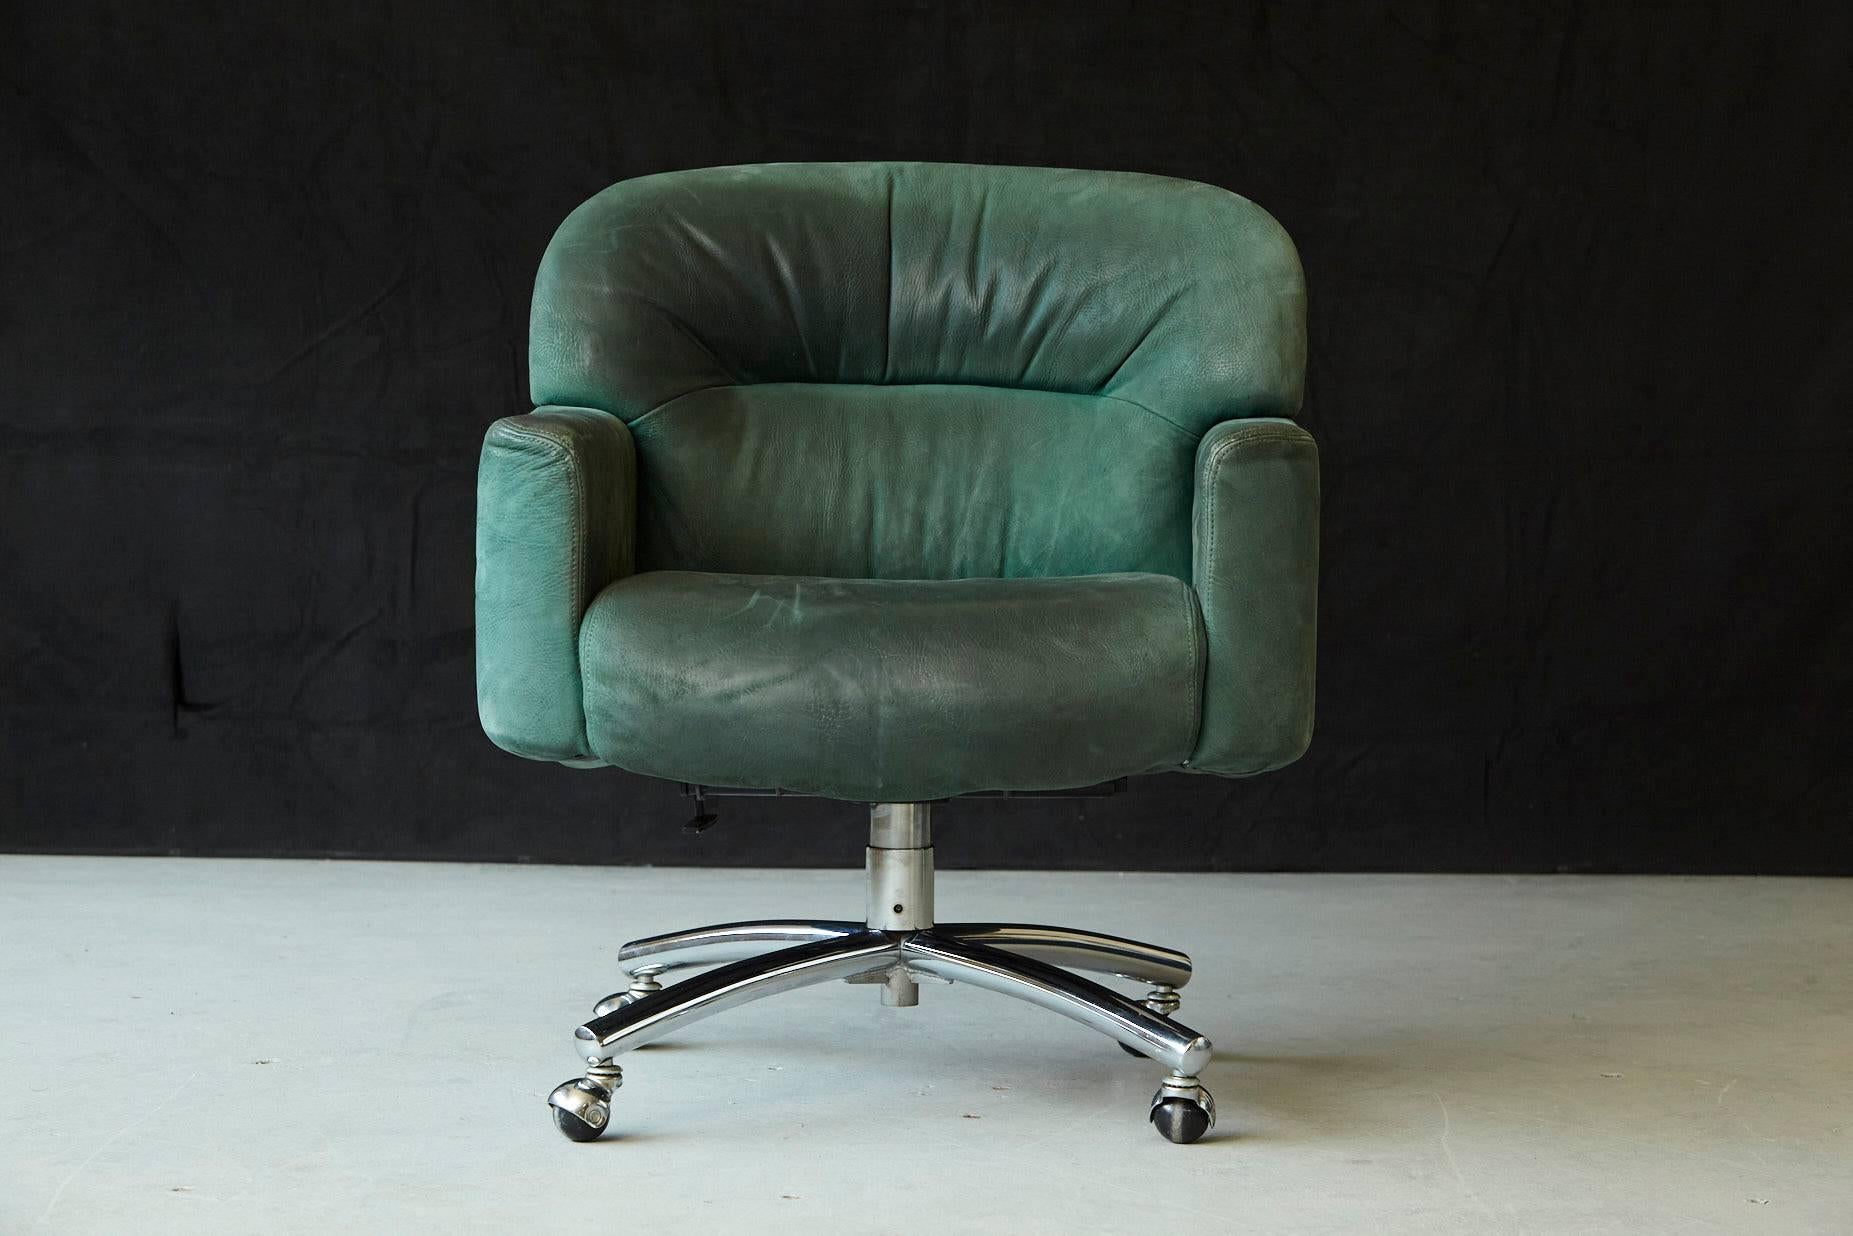 Very comfortable swiveling office chair on a four star chromed base with casters in green / grey suede leather by Harter Corporation, 1979.
The chair has some stains and scratches and overall nice patina, please refer to the detailed photos.